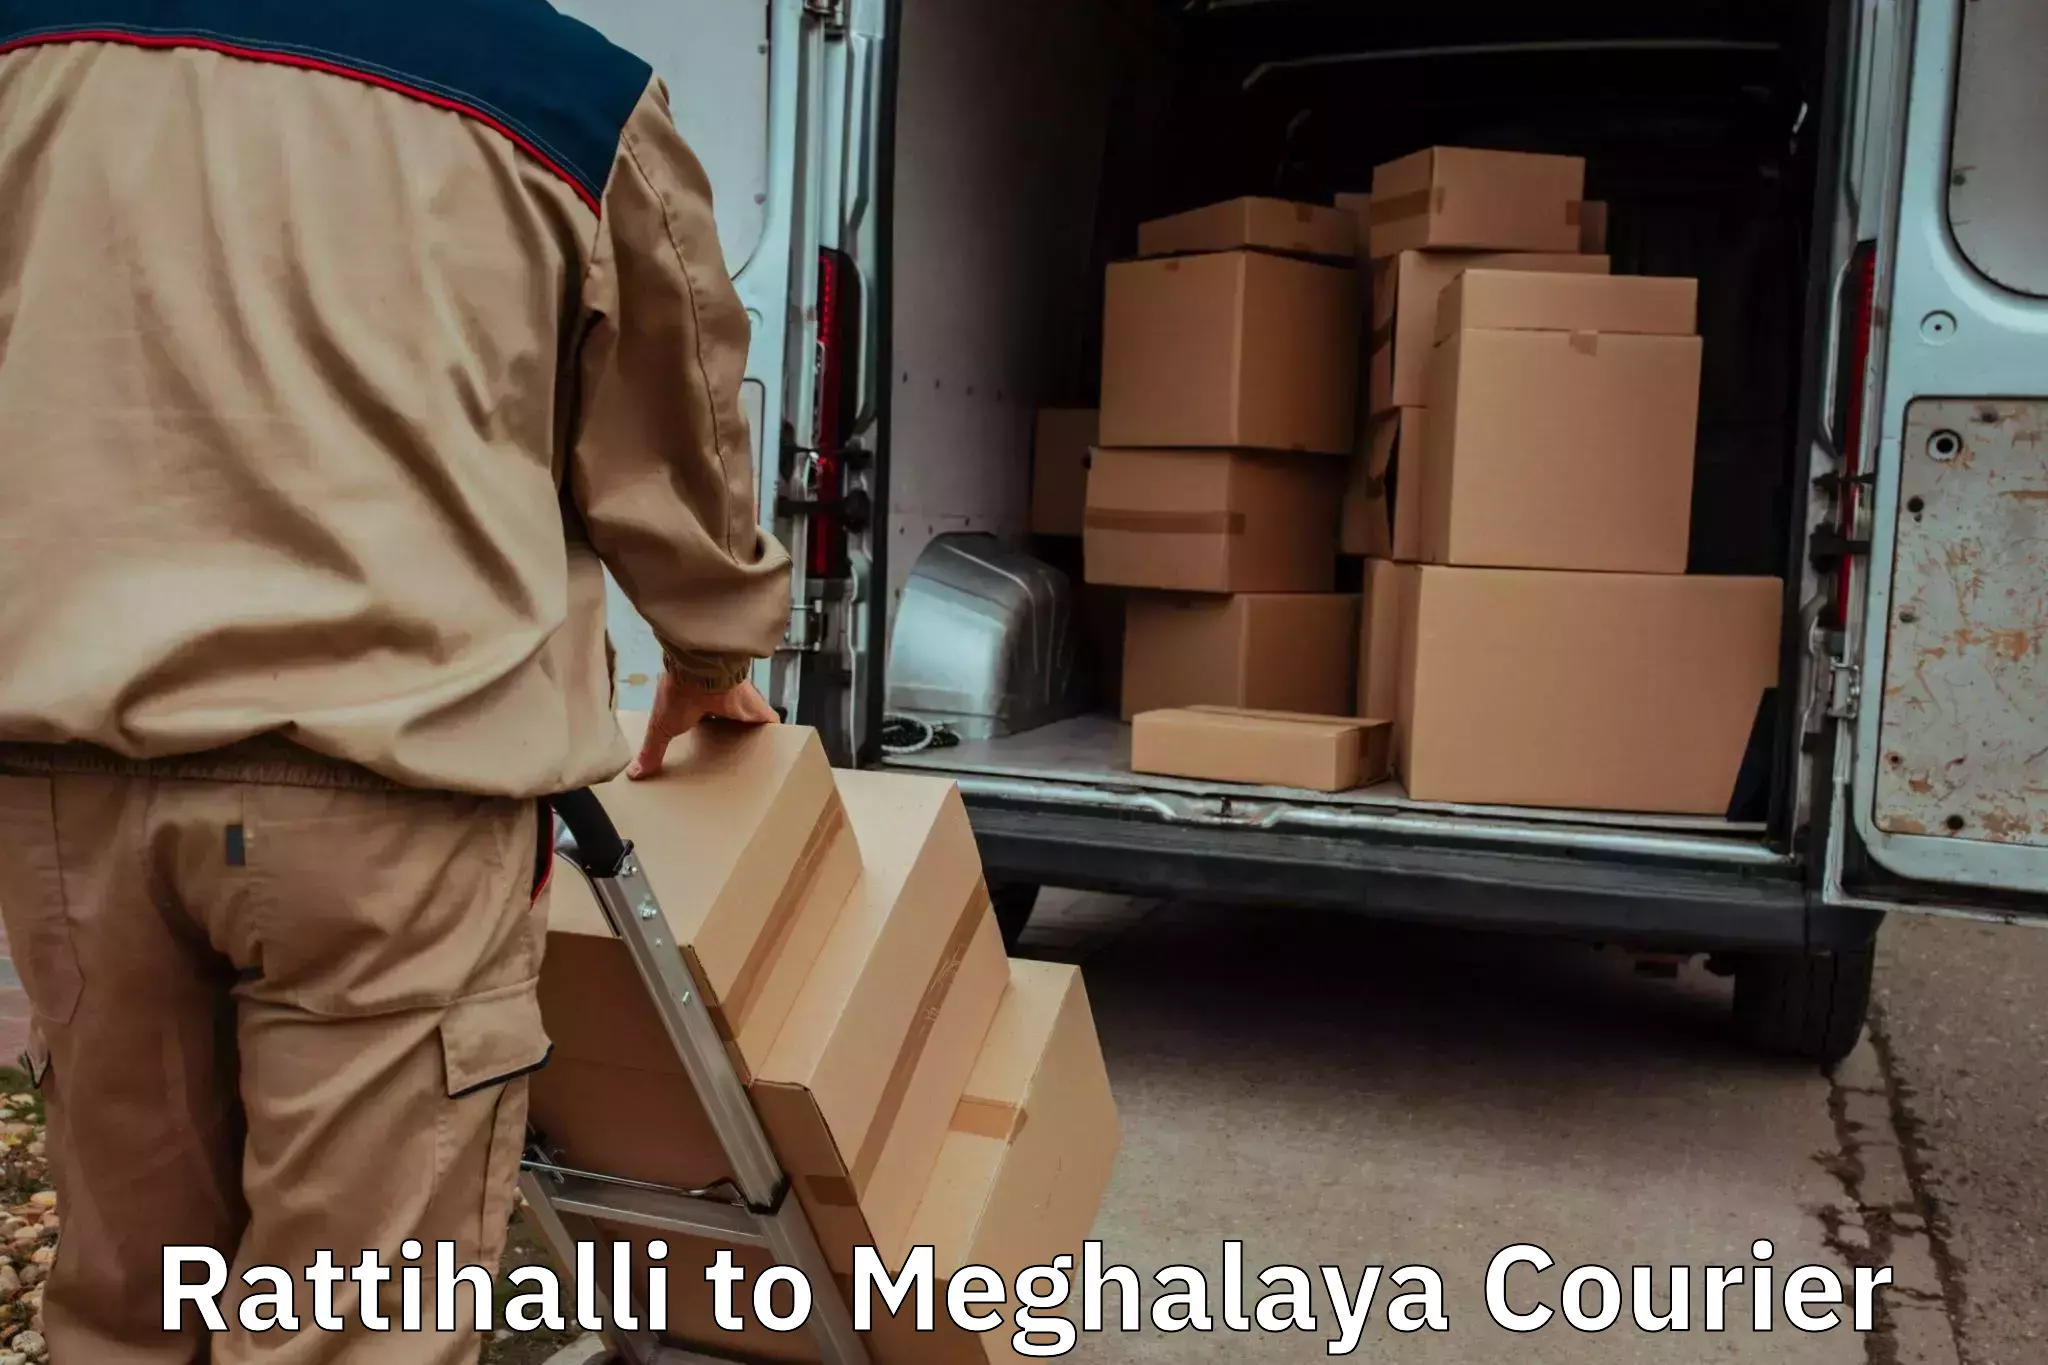 Professional packing and transport Rattihalli to Shillong